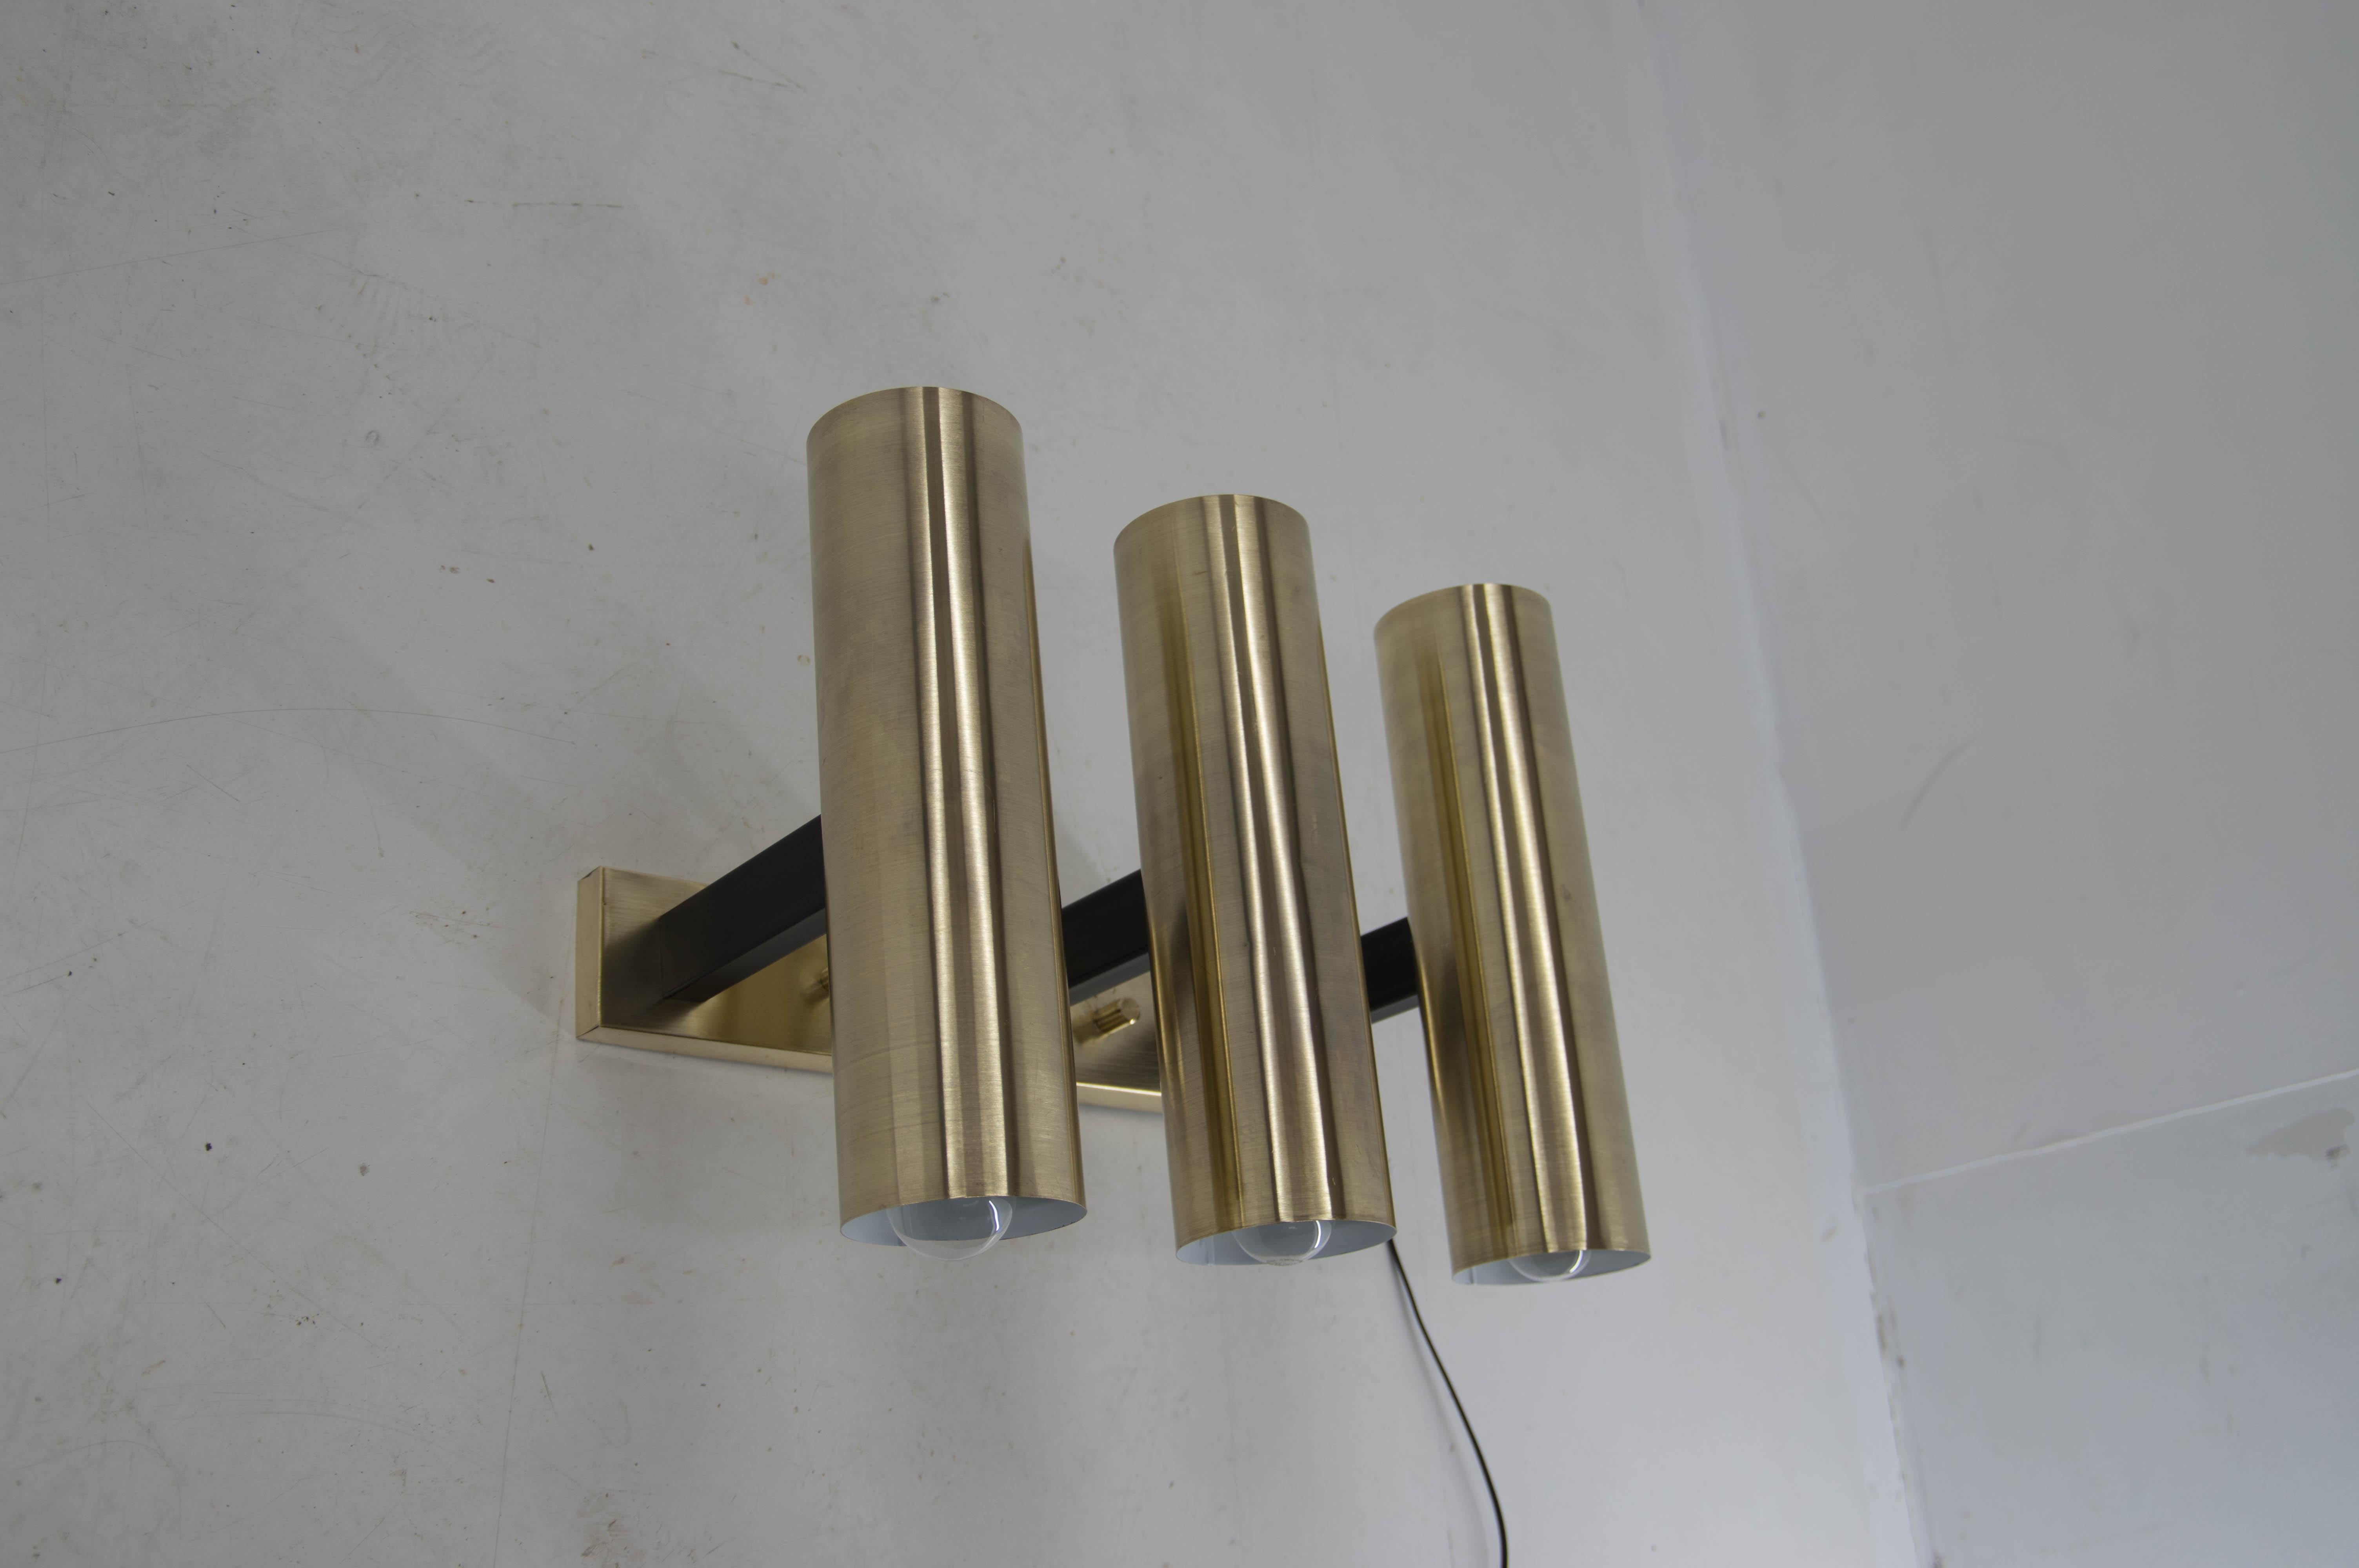 Large wall lamps custom made for cinema hall in 1970s.
Four items available.
Price per 1 item.
Restored: new black paint, new white paint inside shades.
Brass polished, few scratches remain.
Rewired: 6x40W, E25-E27 bulbs
US wiring compatible.